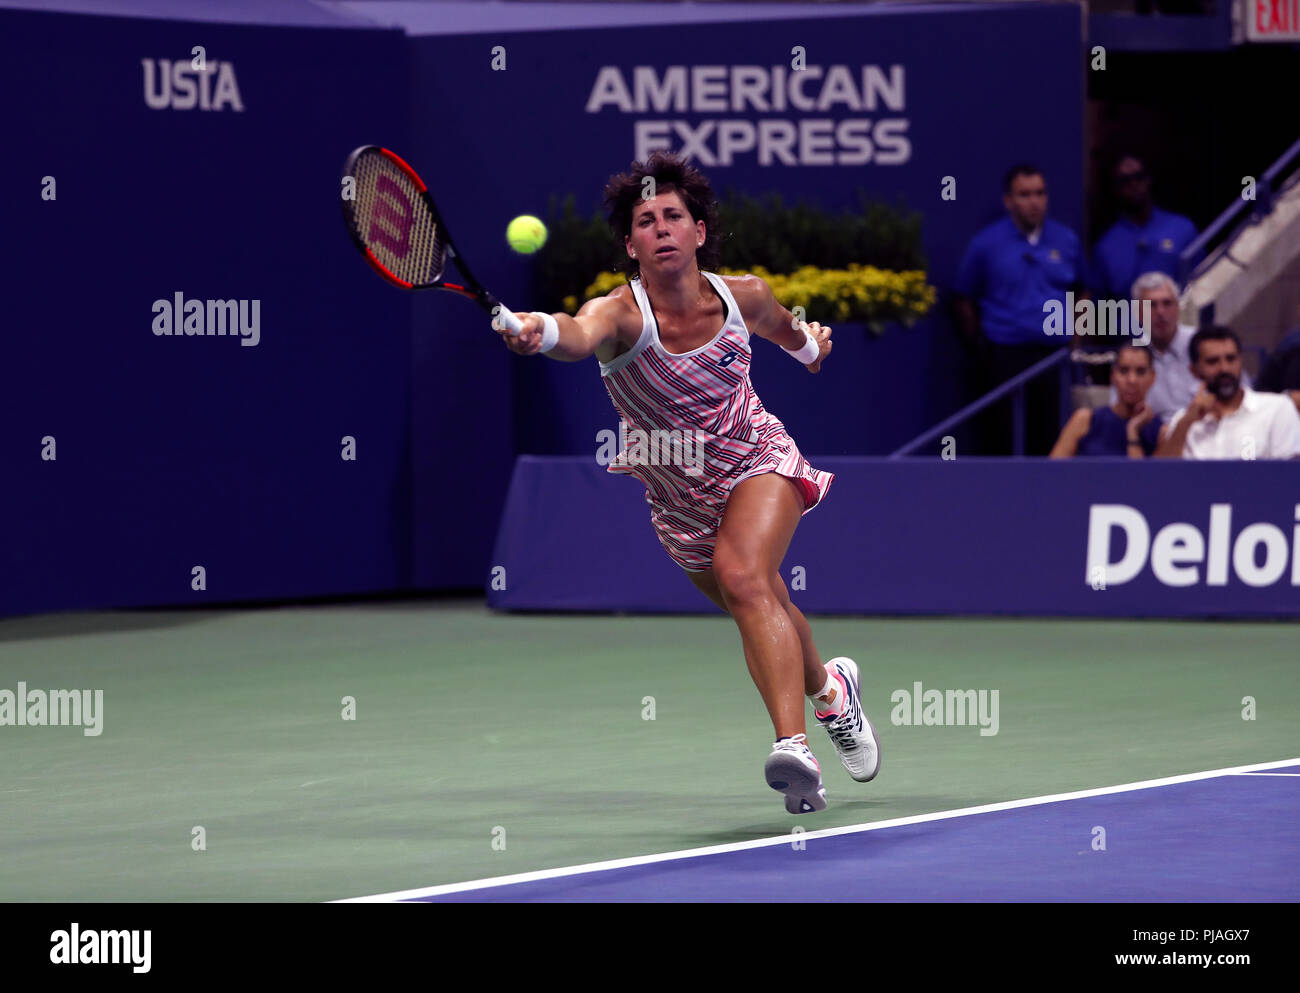 Flushing Meadows, New York - September 5, 2018: US Open Tennis:  Carla Suarez-Navarro of Spain strikes a return to Madison Keys of the United States during their quarterfinal match at the US Open in Flushing Meadows, New York. Credit: Adam Stoltman/Alamy Live News Stock Photo